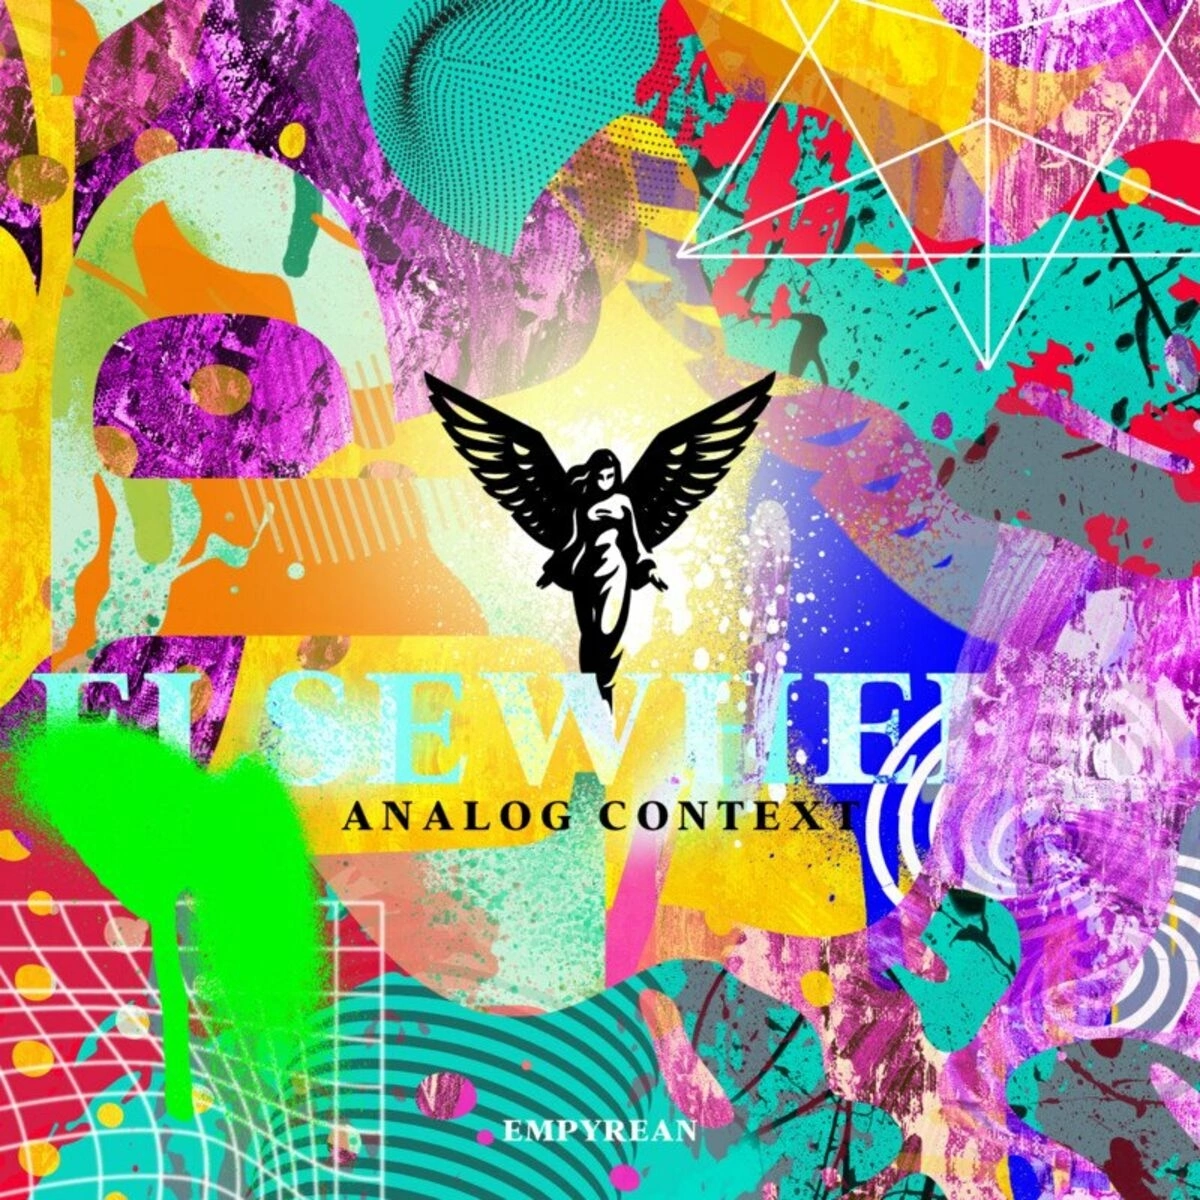 Analog Context - Elsewhere (Extended Mix)